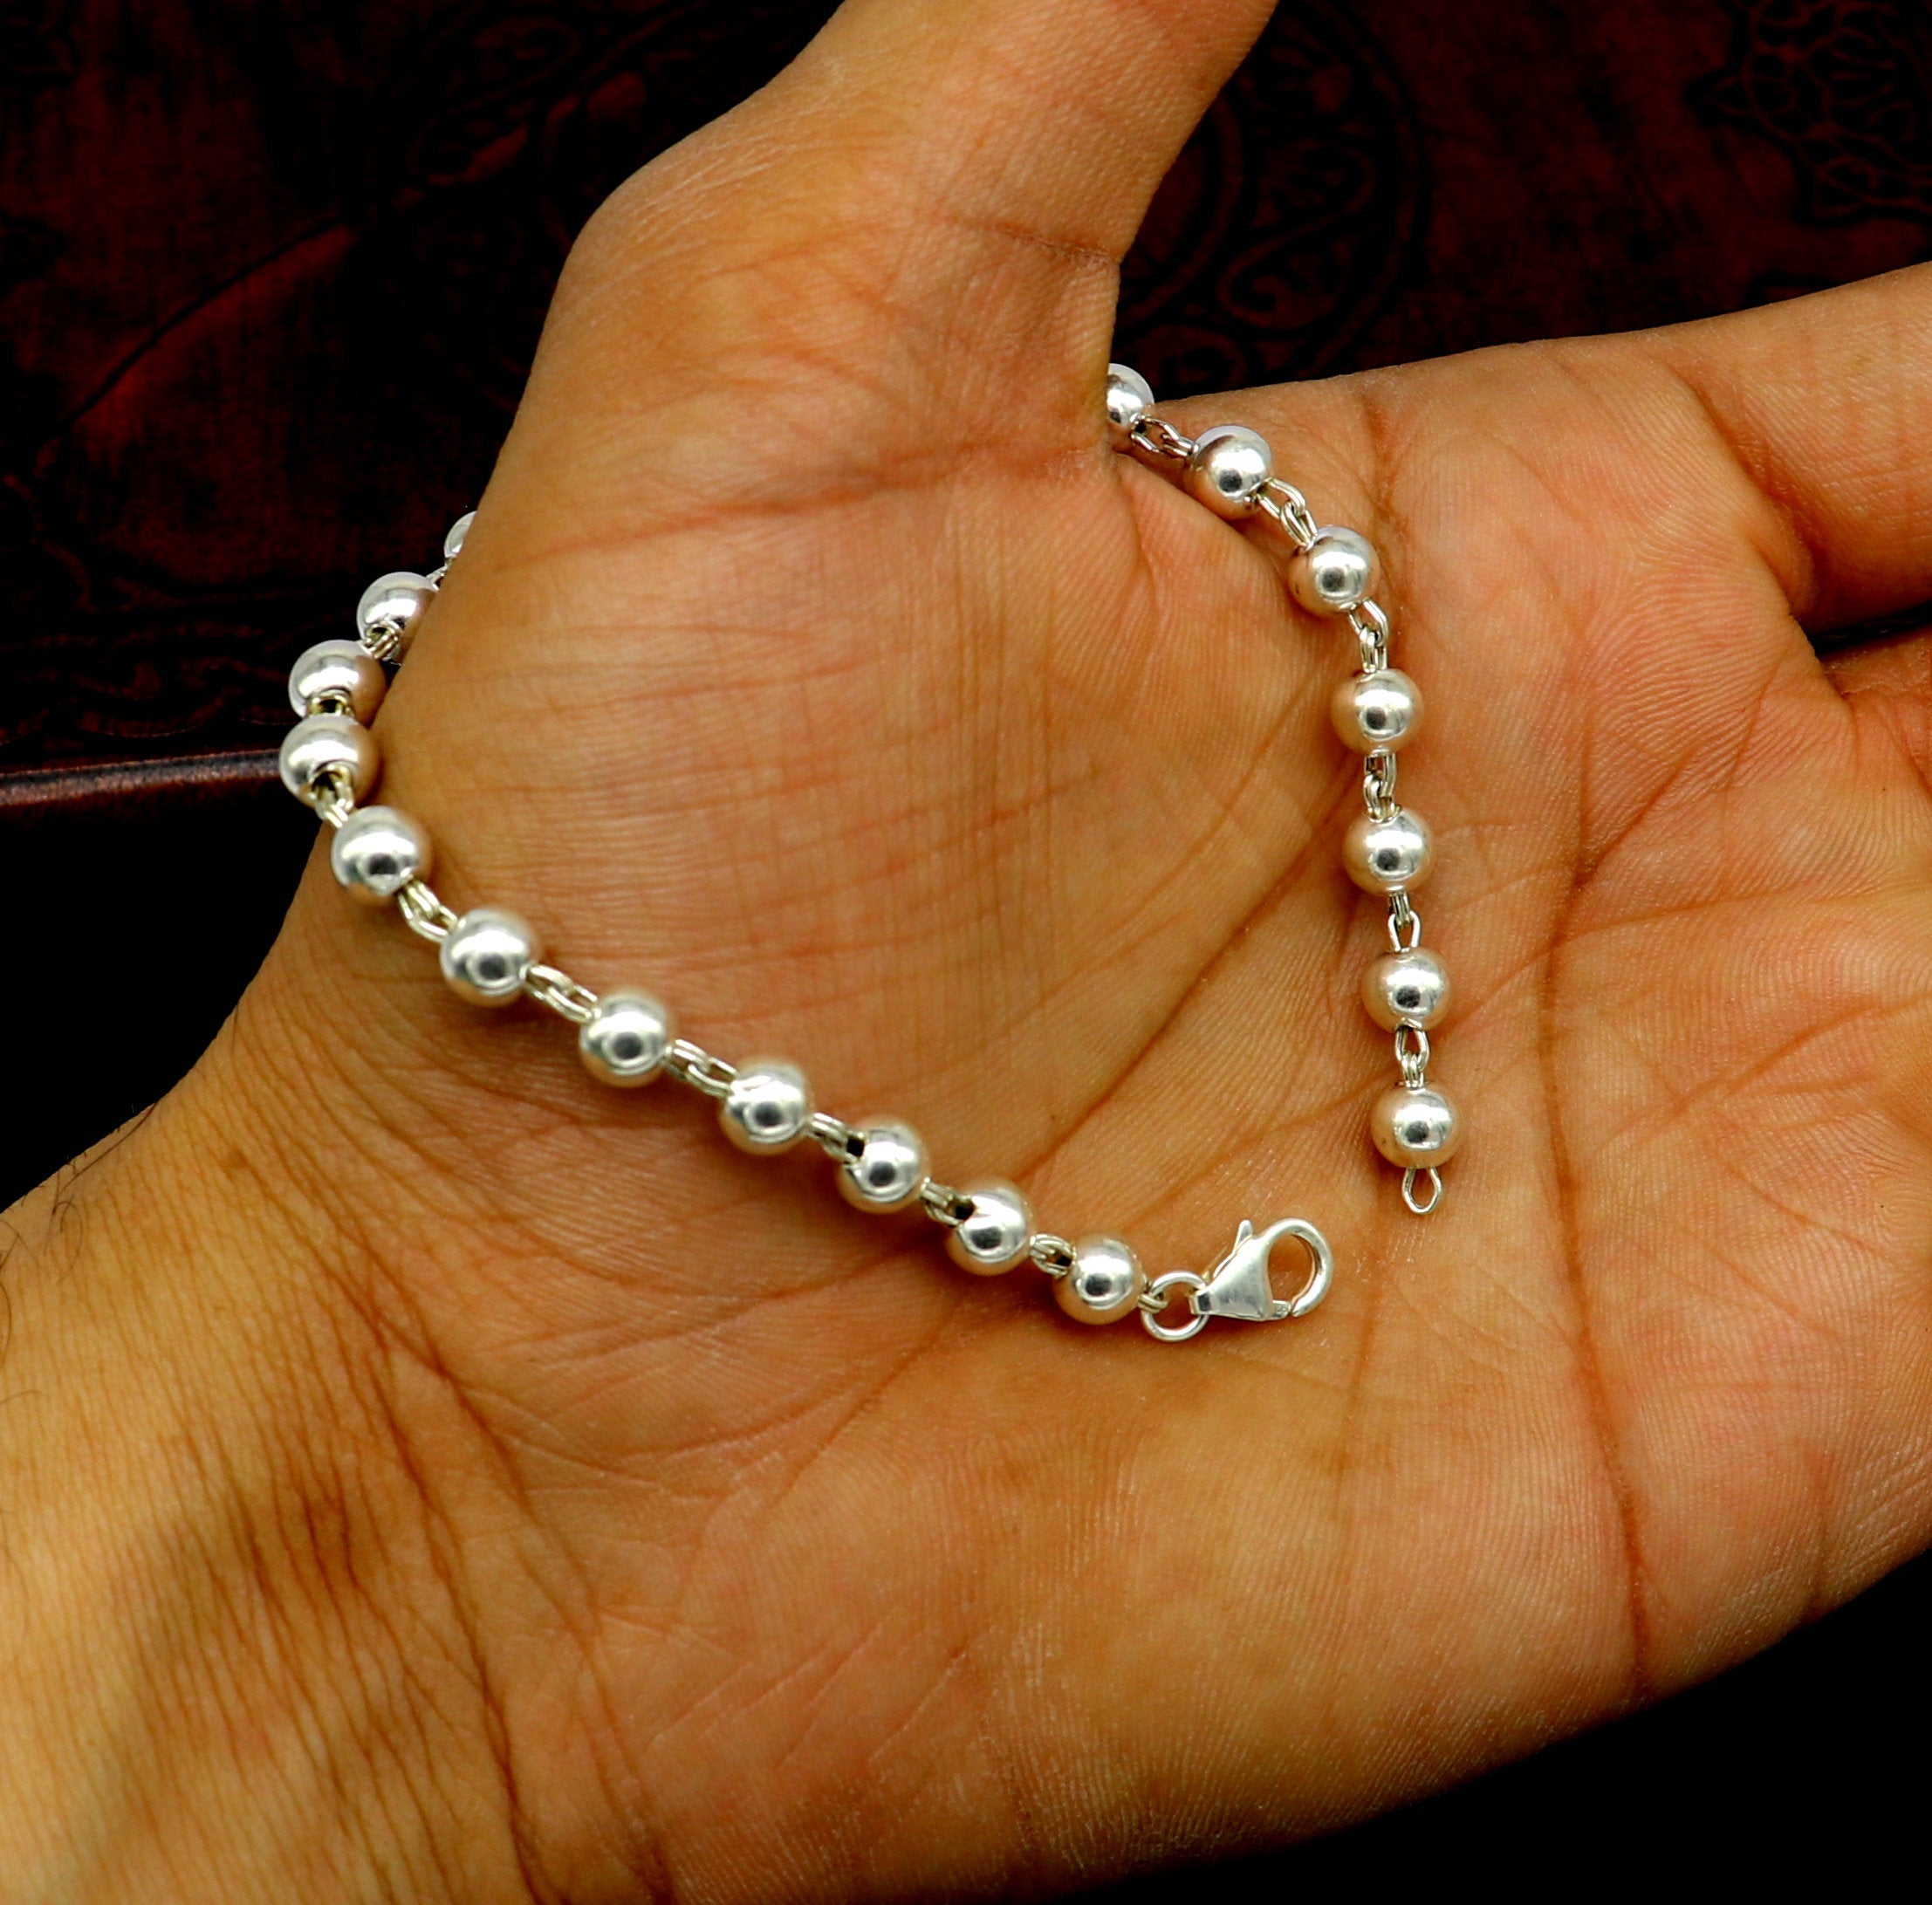 Edison Pearl Bracelet in Rhodium Plated Sterling Silver 8 Inches - 3781772  - TJC